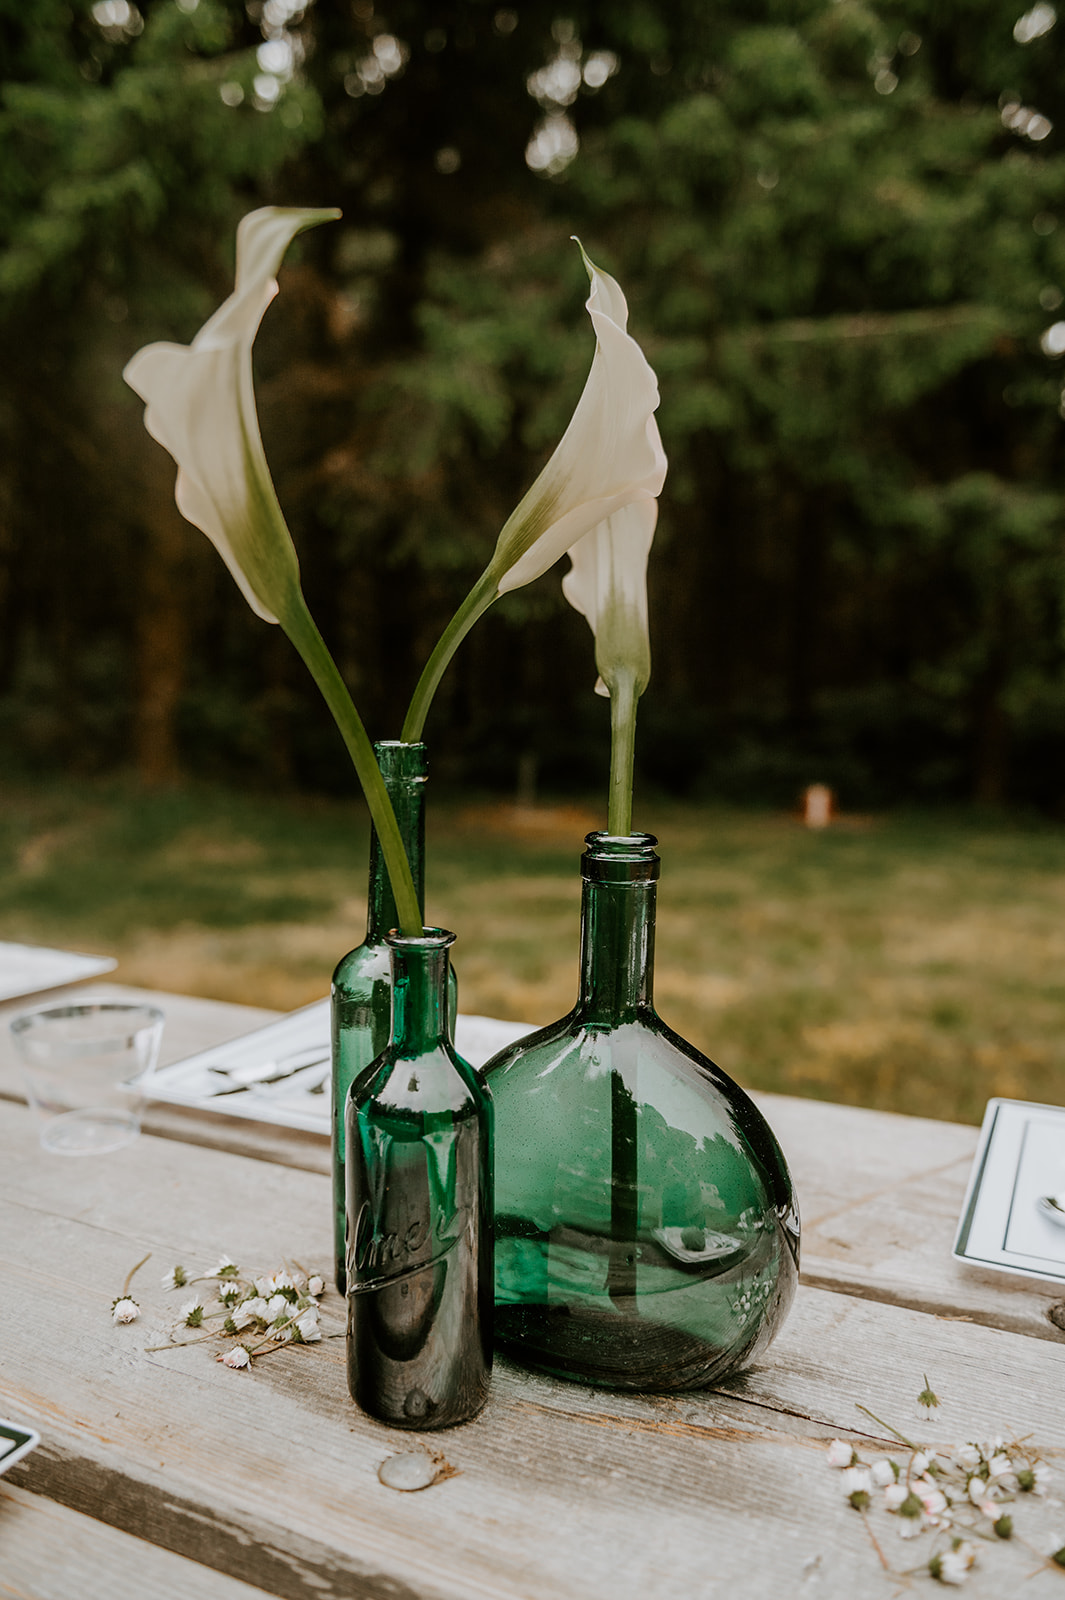 Calla lilies in vases for wedding decor